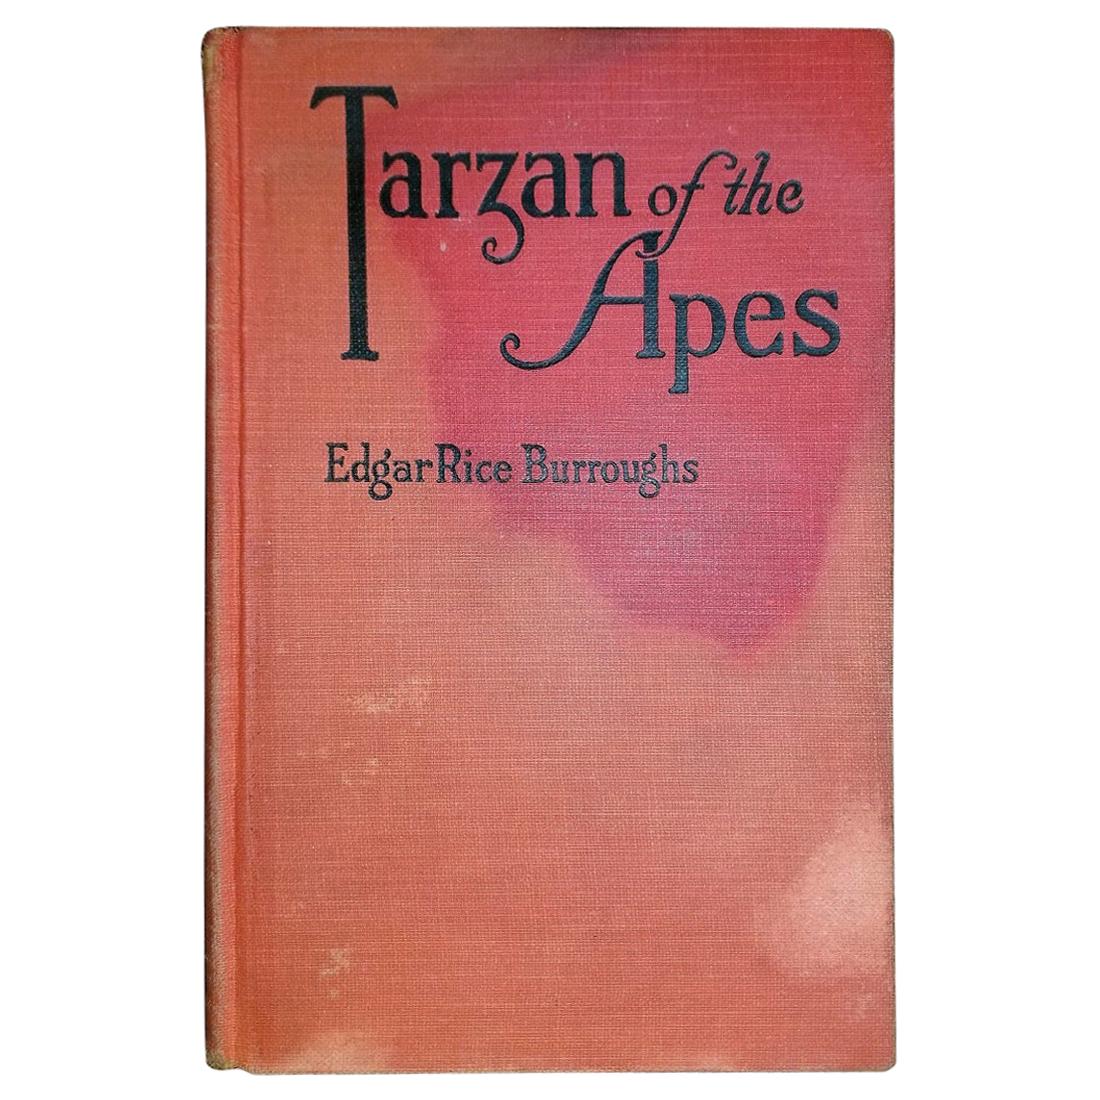 Tarzan of the Apes by Edgar Rice Burroughs Grosset 1st Edition